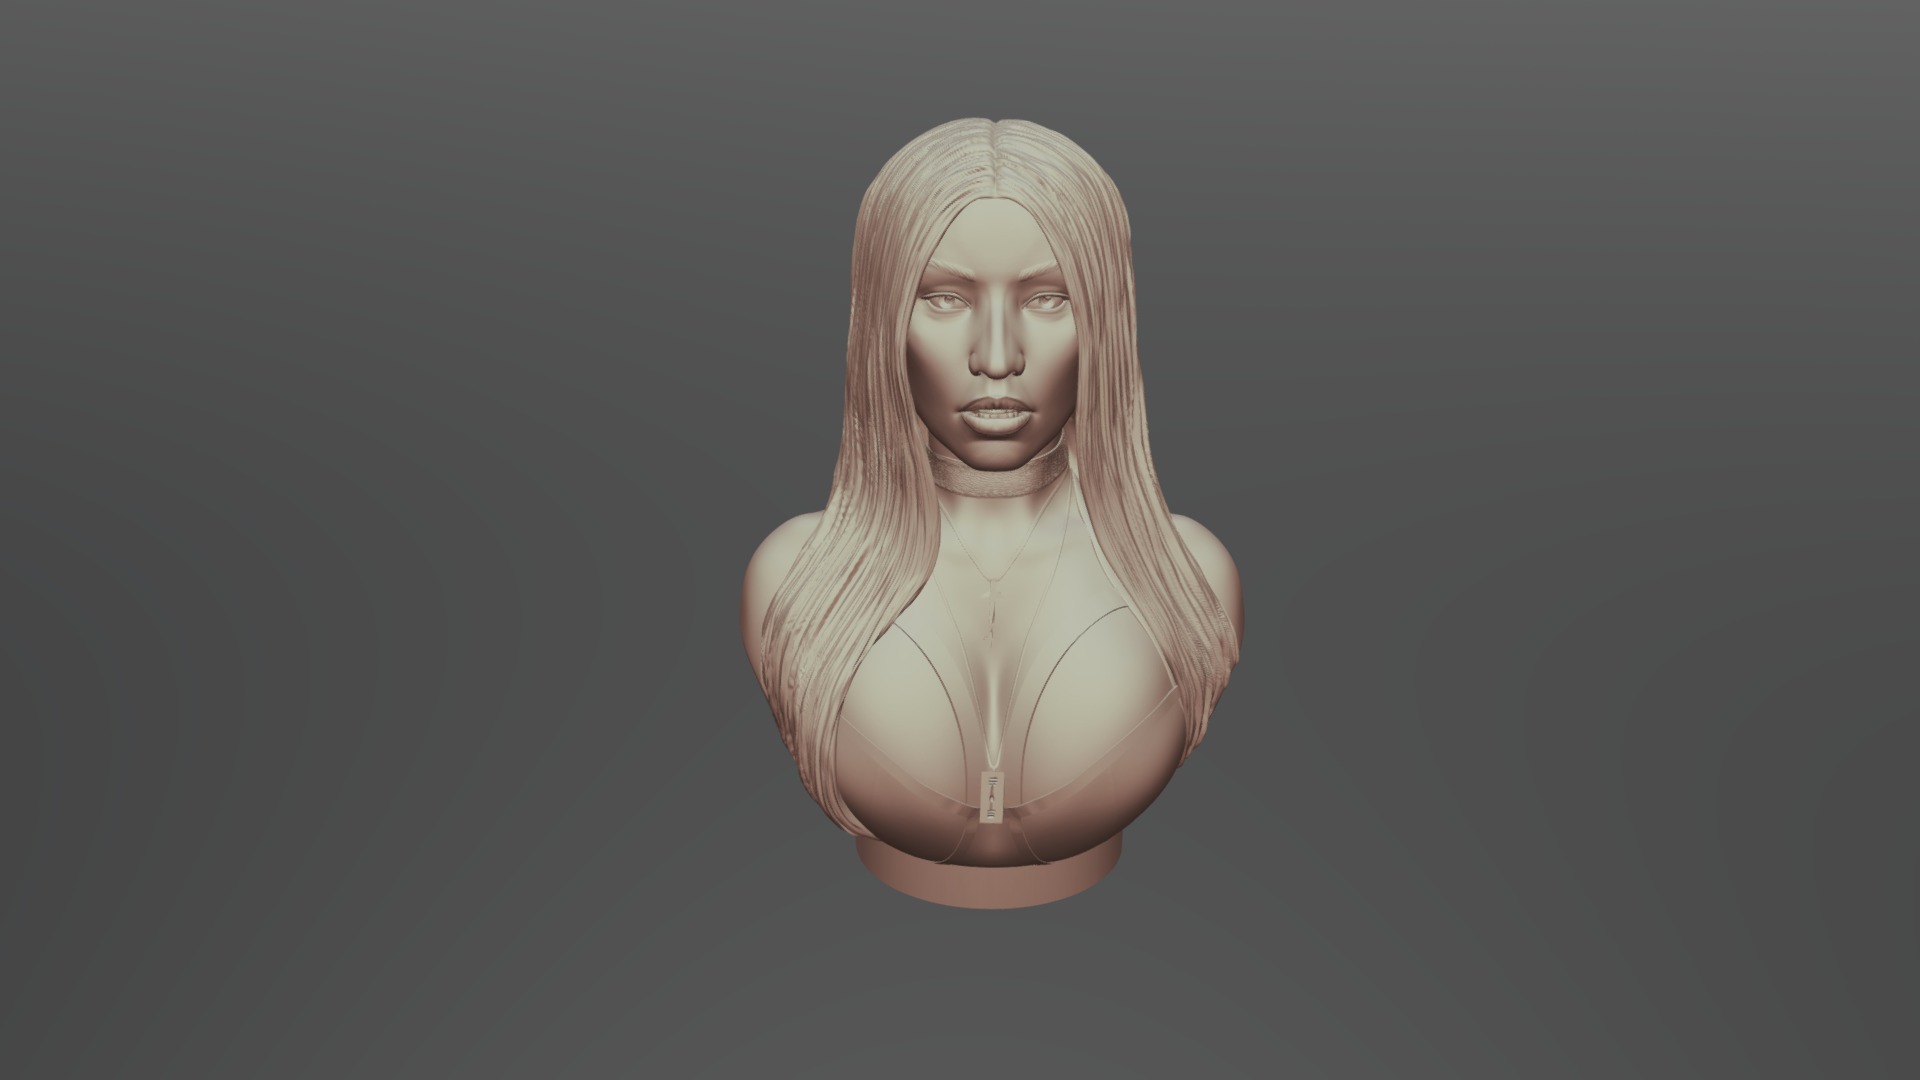 3D model 3D sculpture of Nicki Minaj ready to 3D print - This is a 3D model of the 3D sculpture of Nicki Minaj ready to 3D print. The 3D model is about a person with long hair.